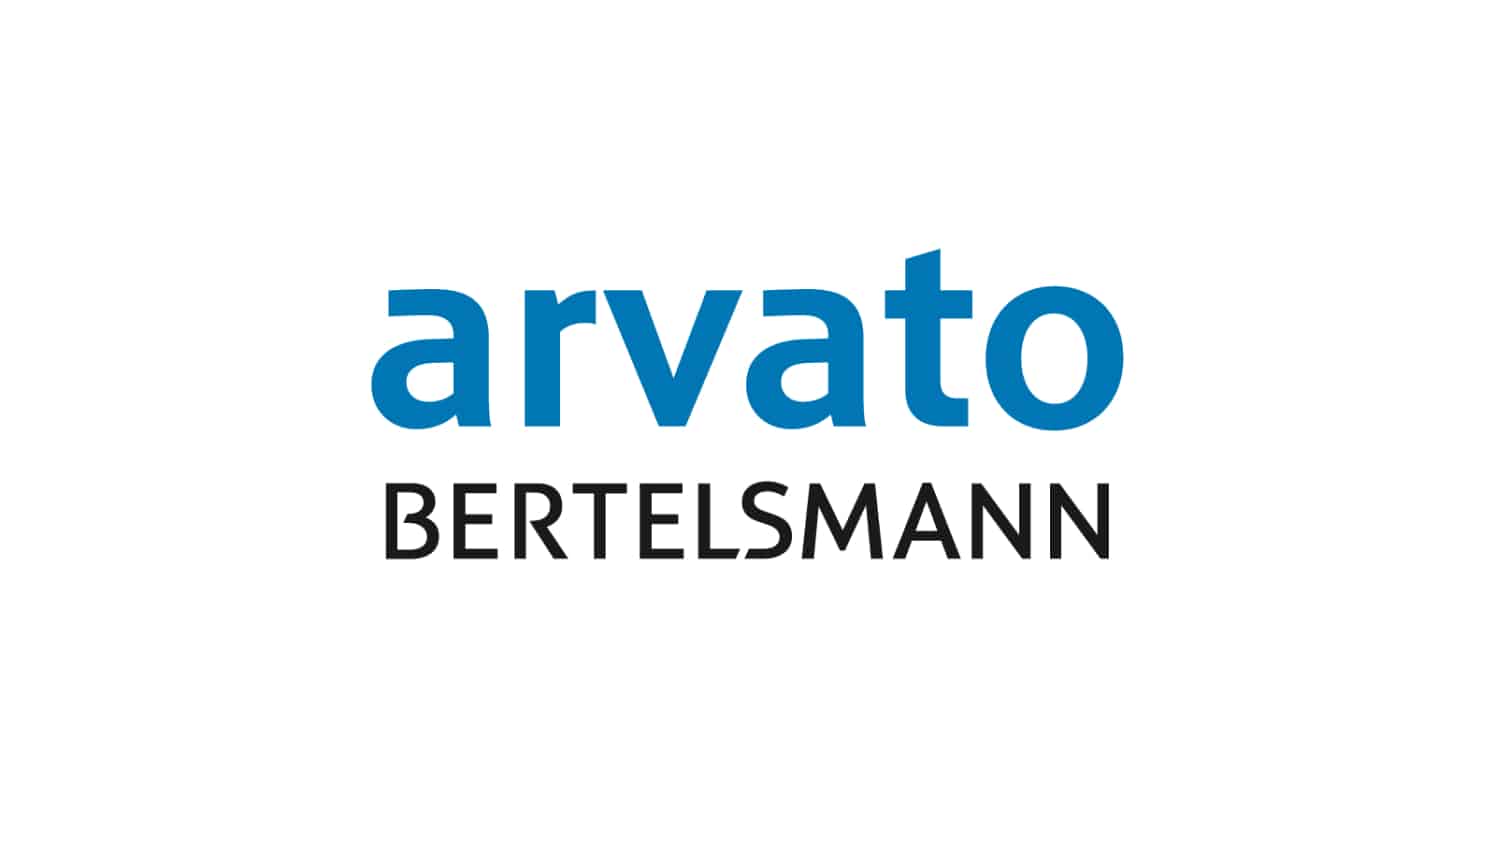 arvato further expands in Russia